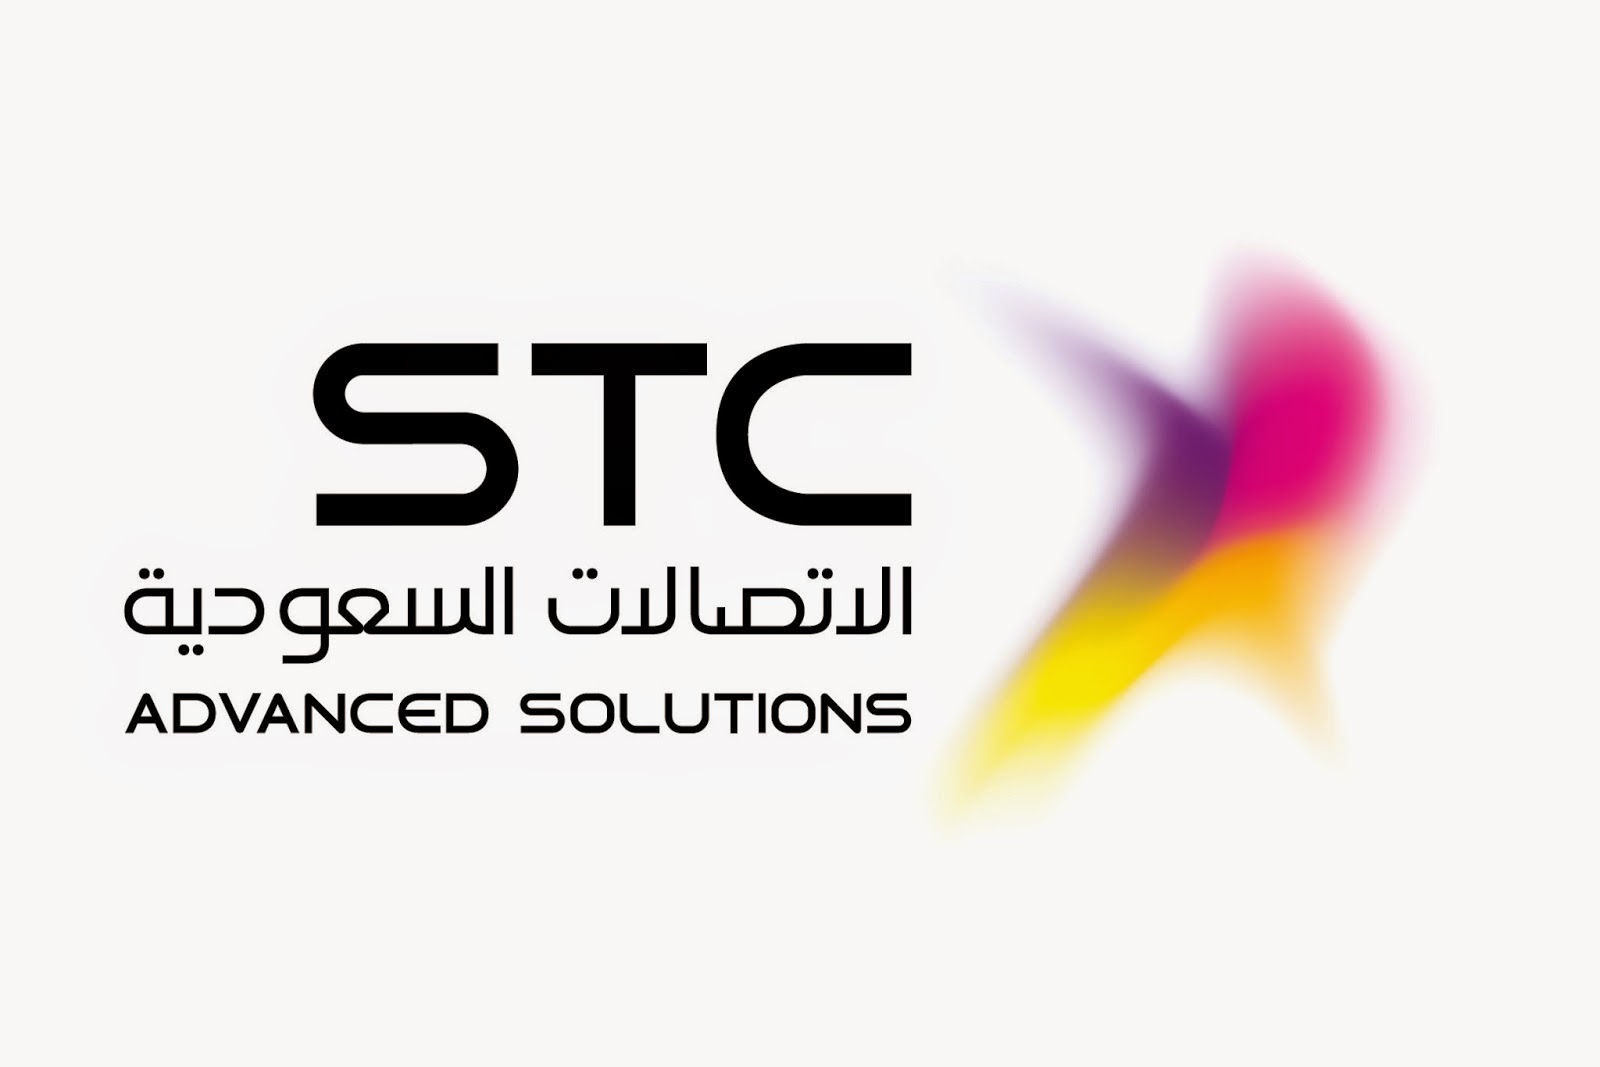 STC Advanced Solutions participated as Technical Sponsor of 2nd edition of GCC Petroleum Media Forum